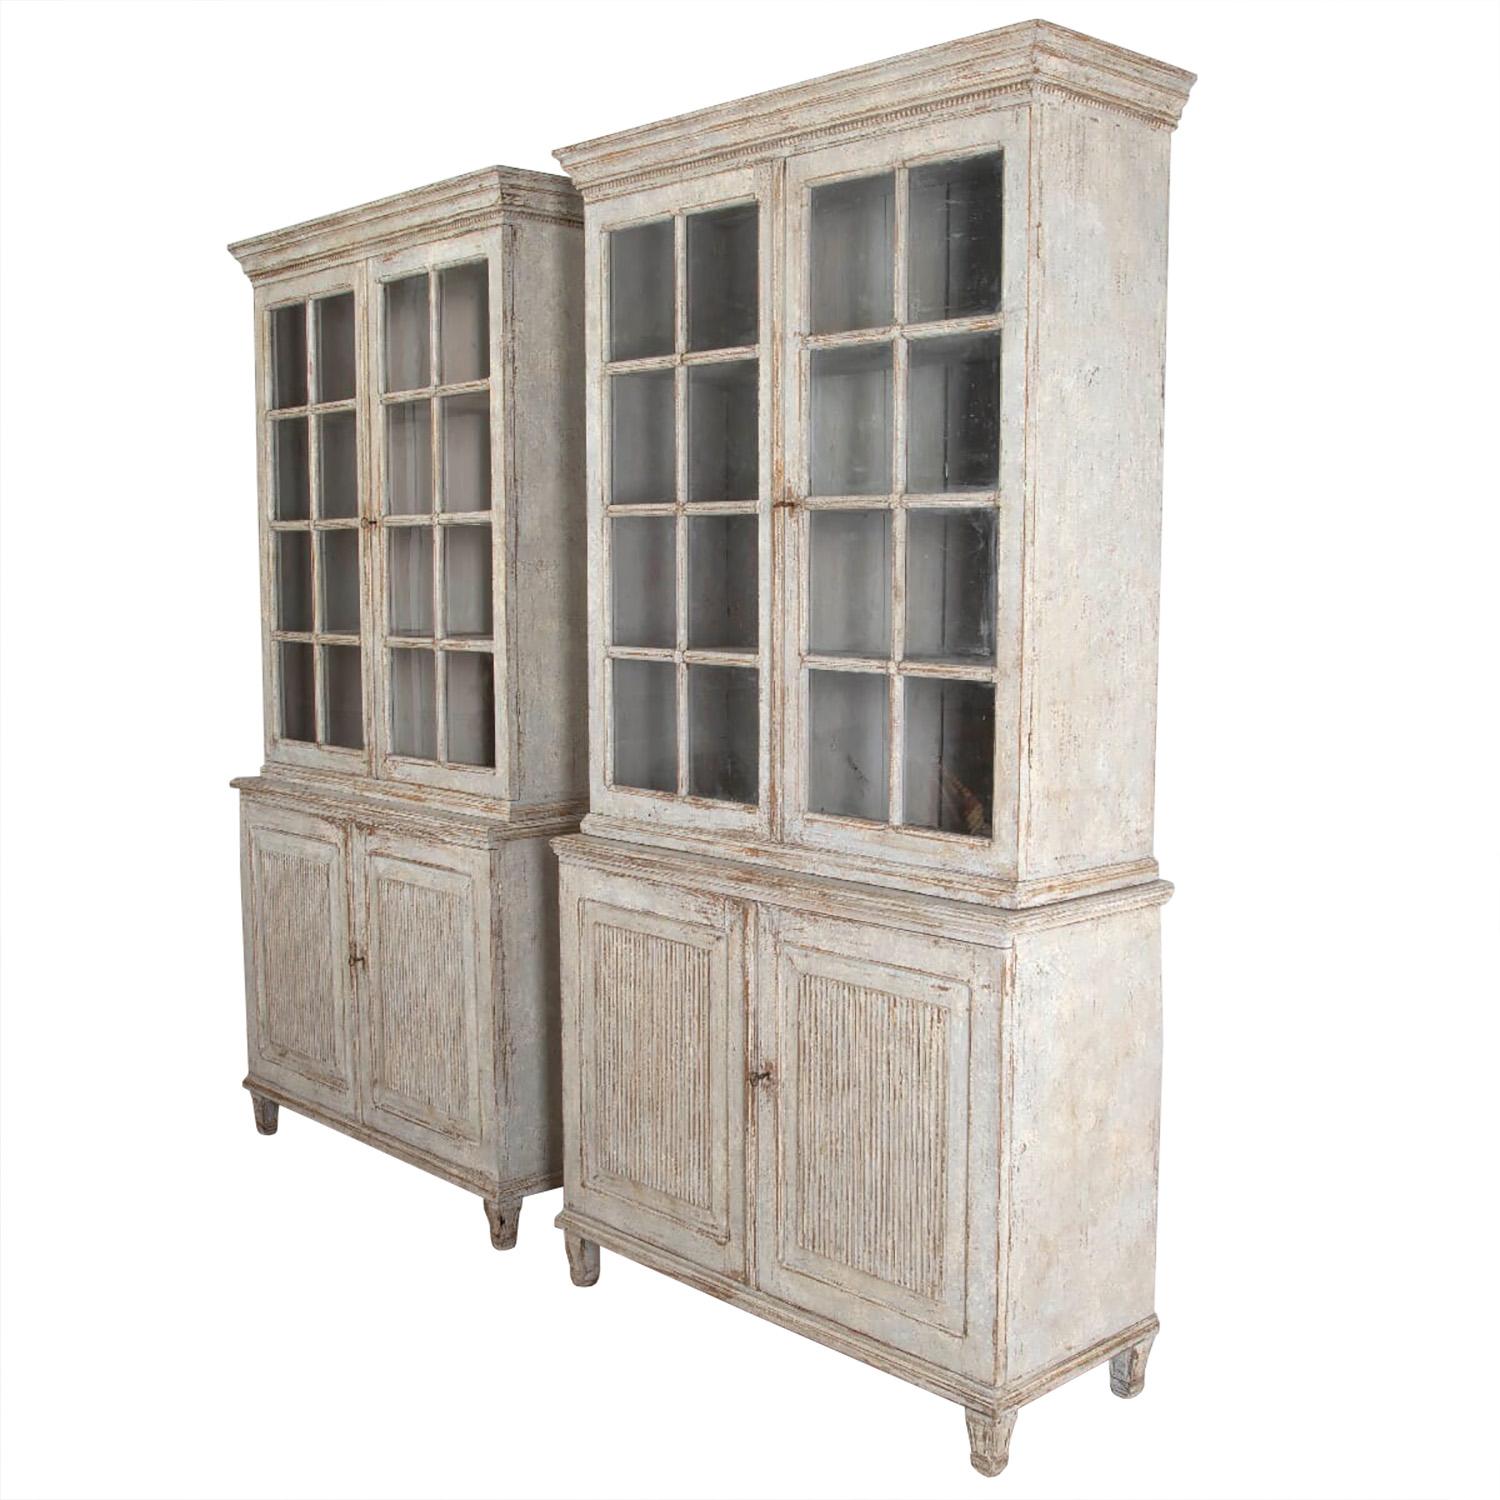 An exceptional pair of continental painted bookcases. Carved cornice with beading edge, with a pair of eight glazed paneled doors opening to storage shelves. Two further reeded doors open to further storage. These bookcases have tapered legs, 20th